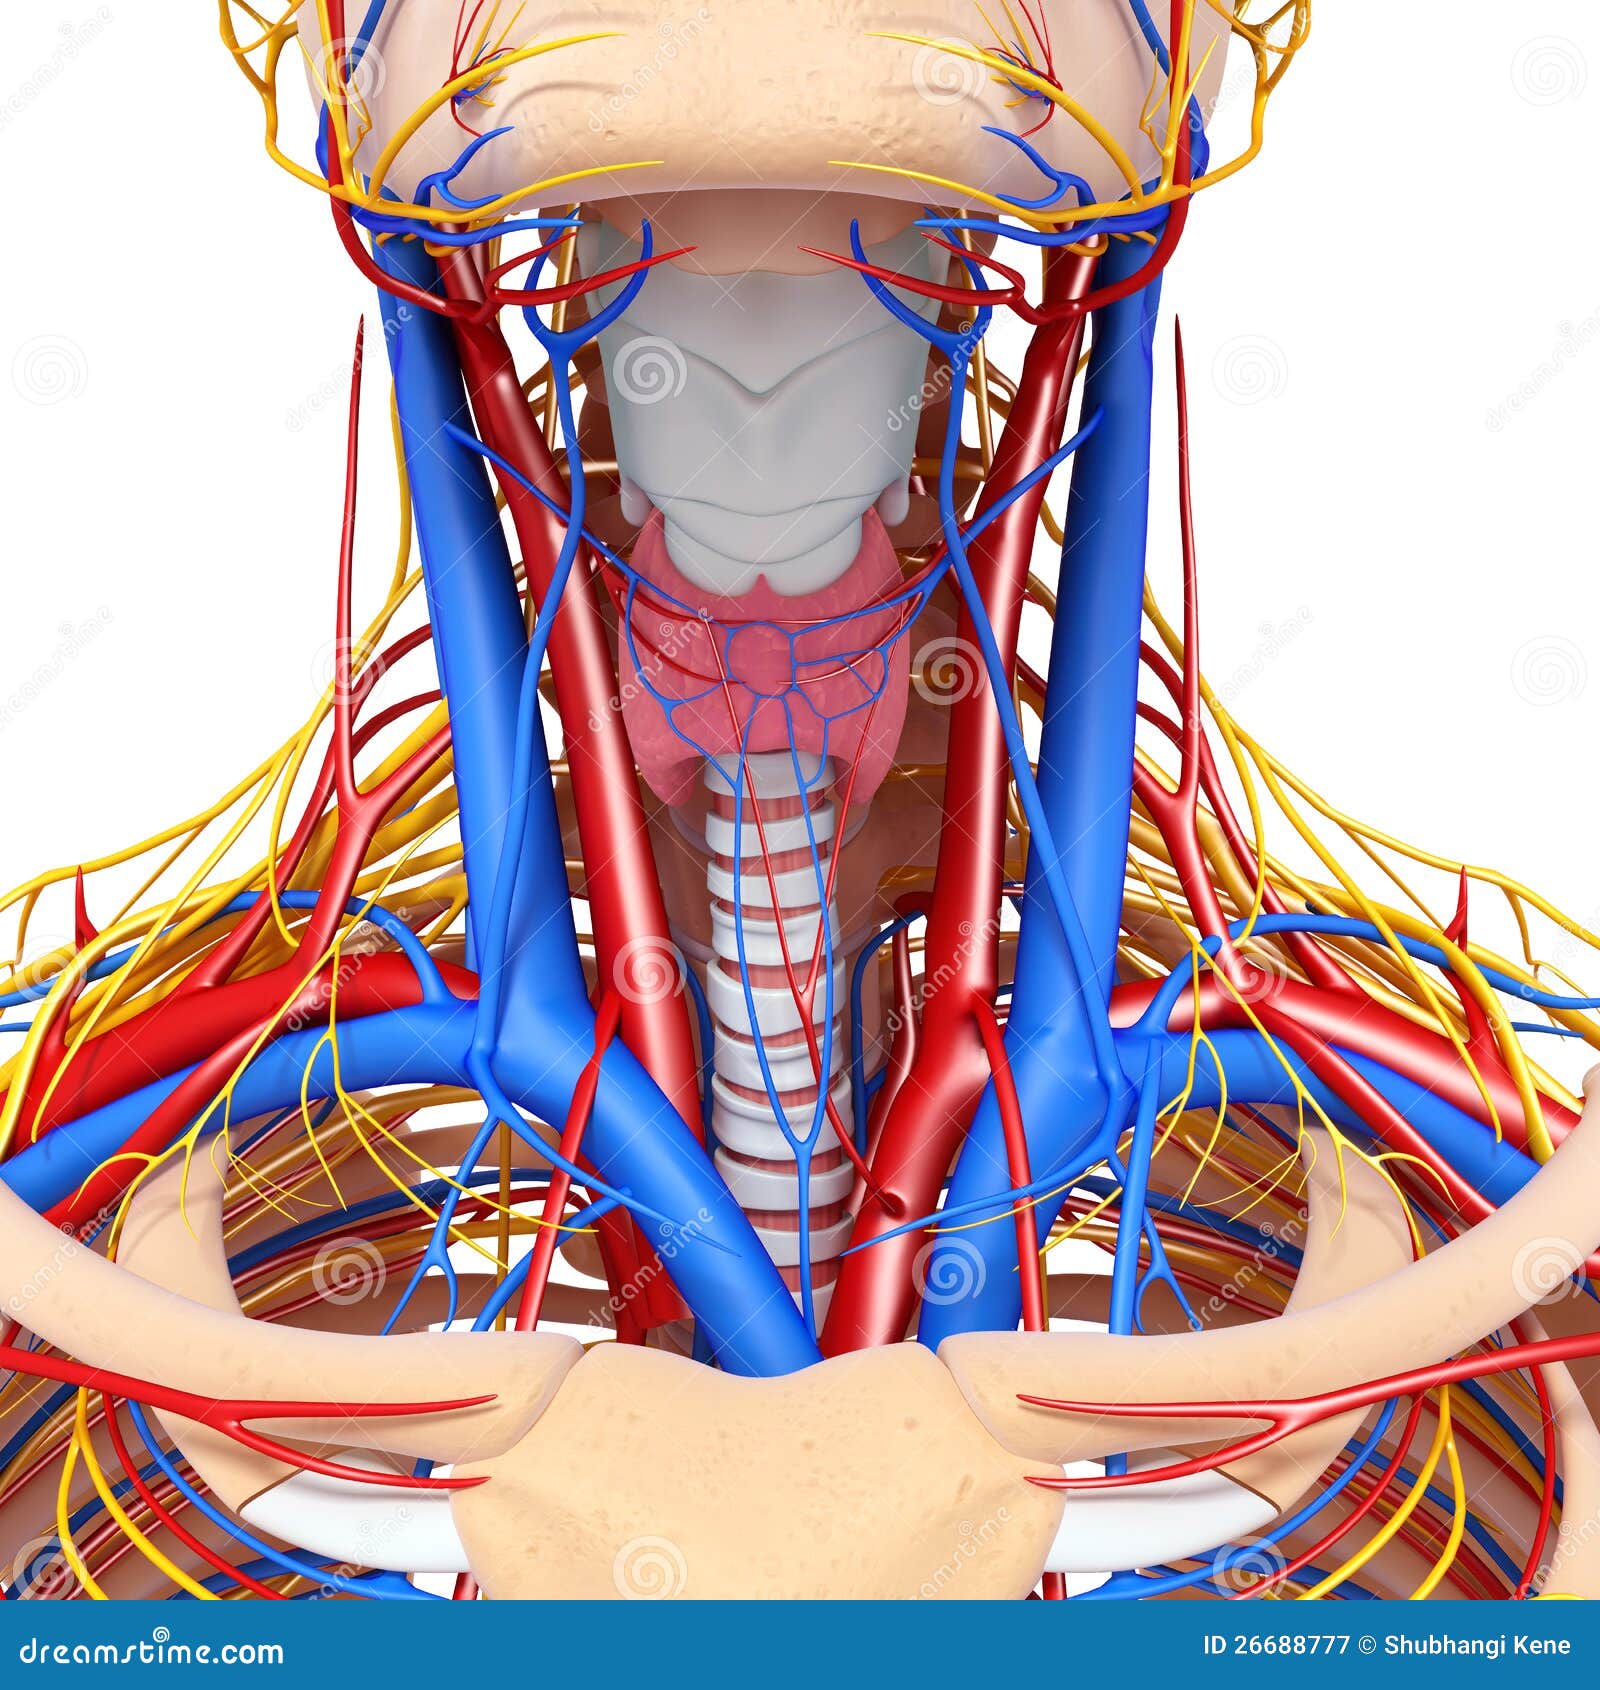 Circulatory System Of Throat Royalty Free Stock Photography - Image